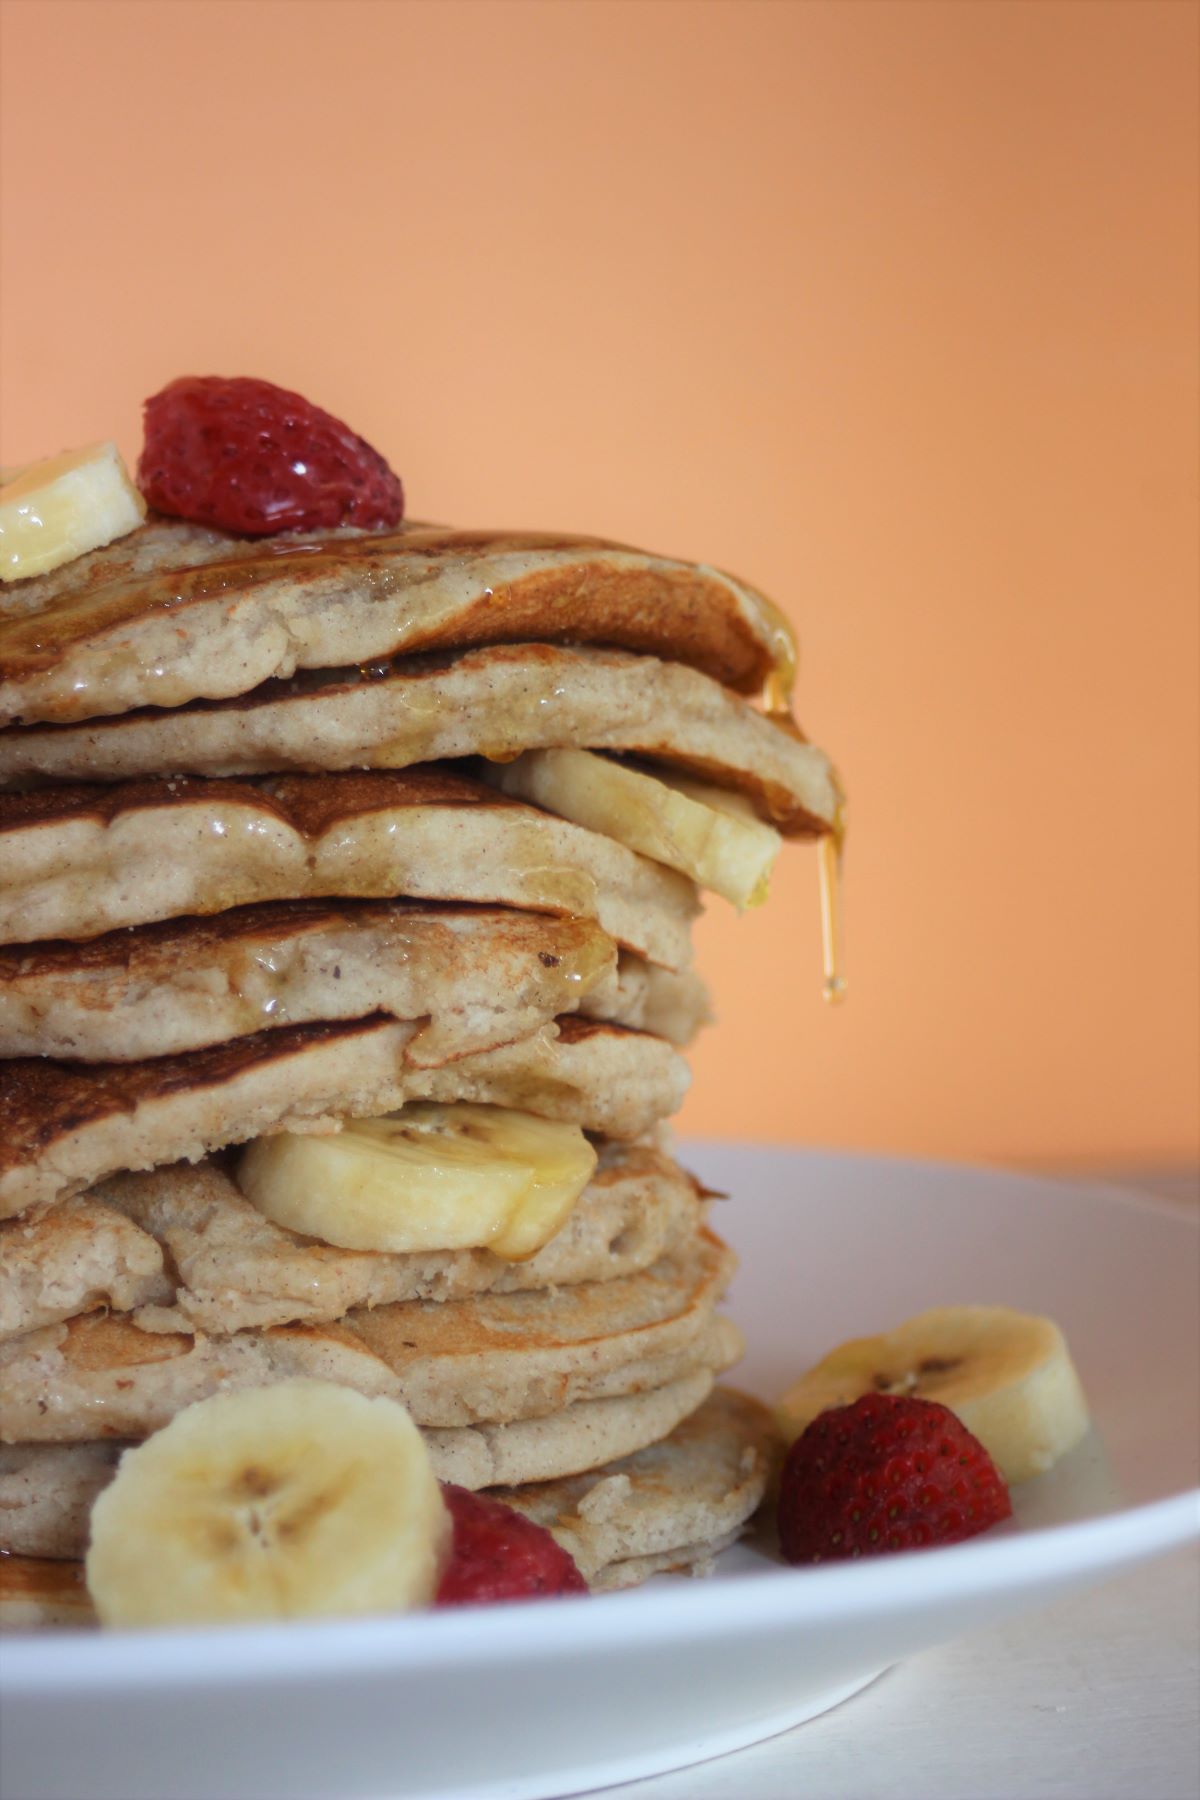 Tower of banana pancakes with banana slices and strawberries on a white plate seen from the front.